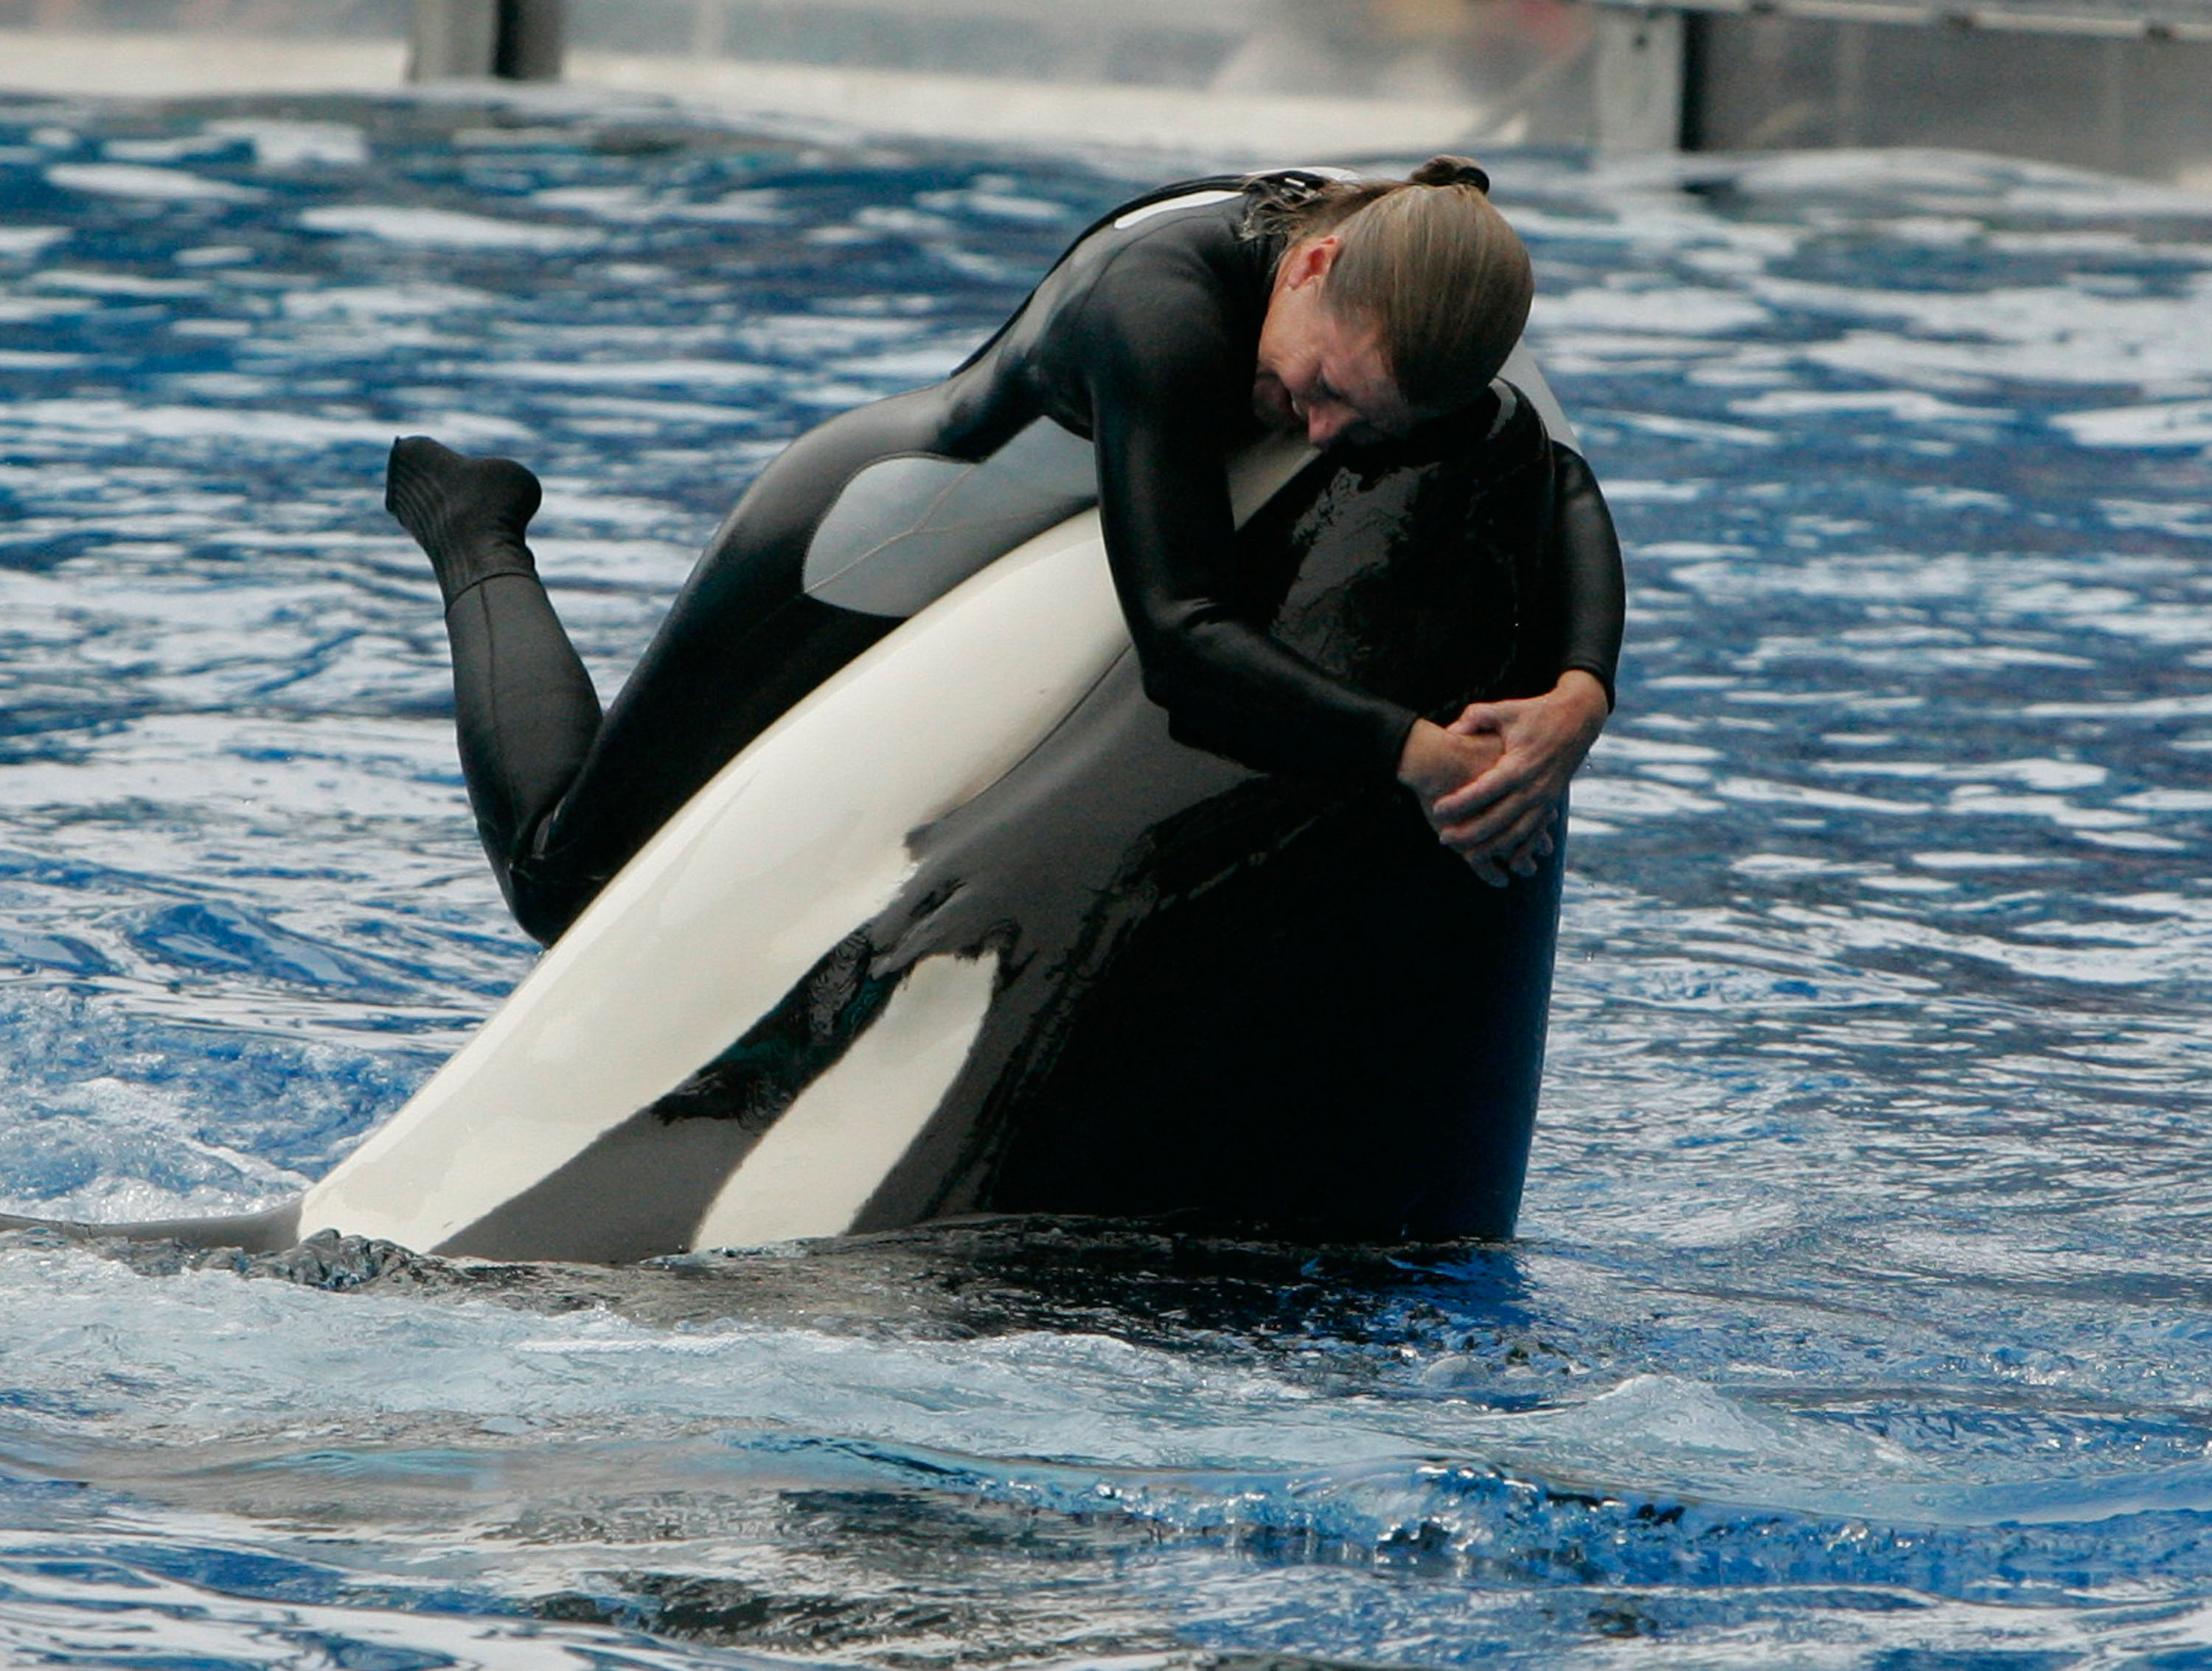 Family Of Seaworld Trainer Killed By Orca Speak Out Almost 12 Years On